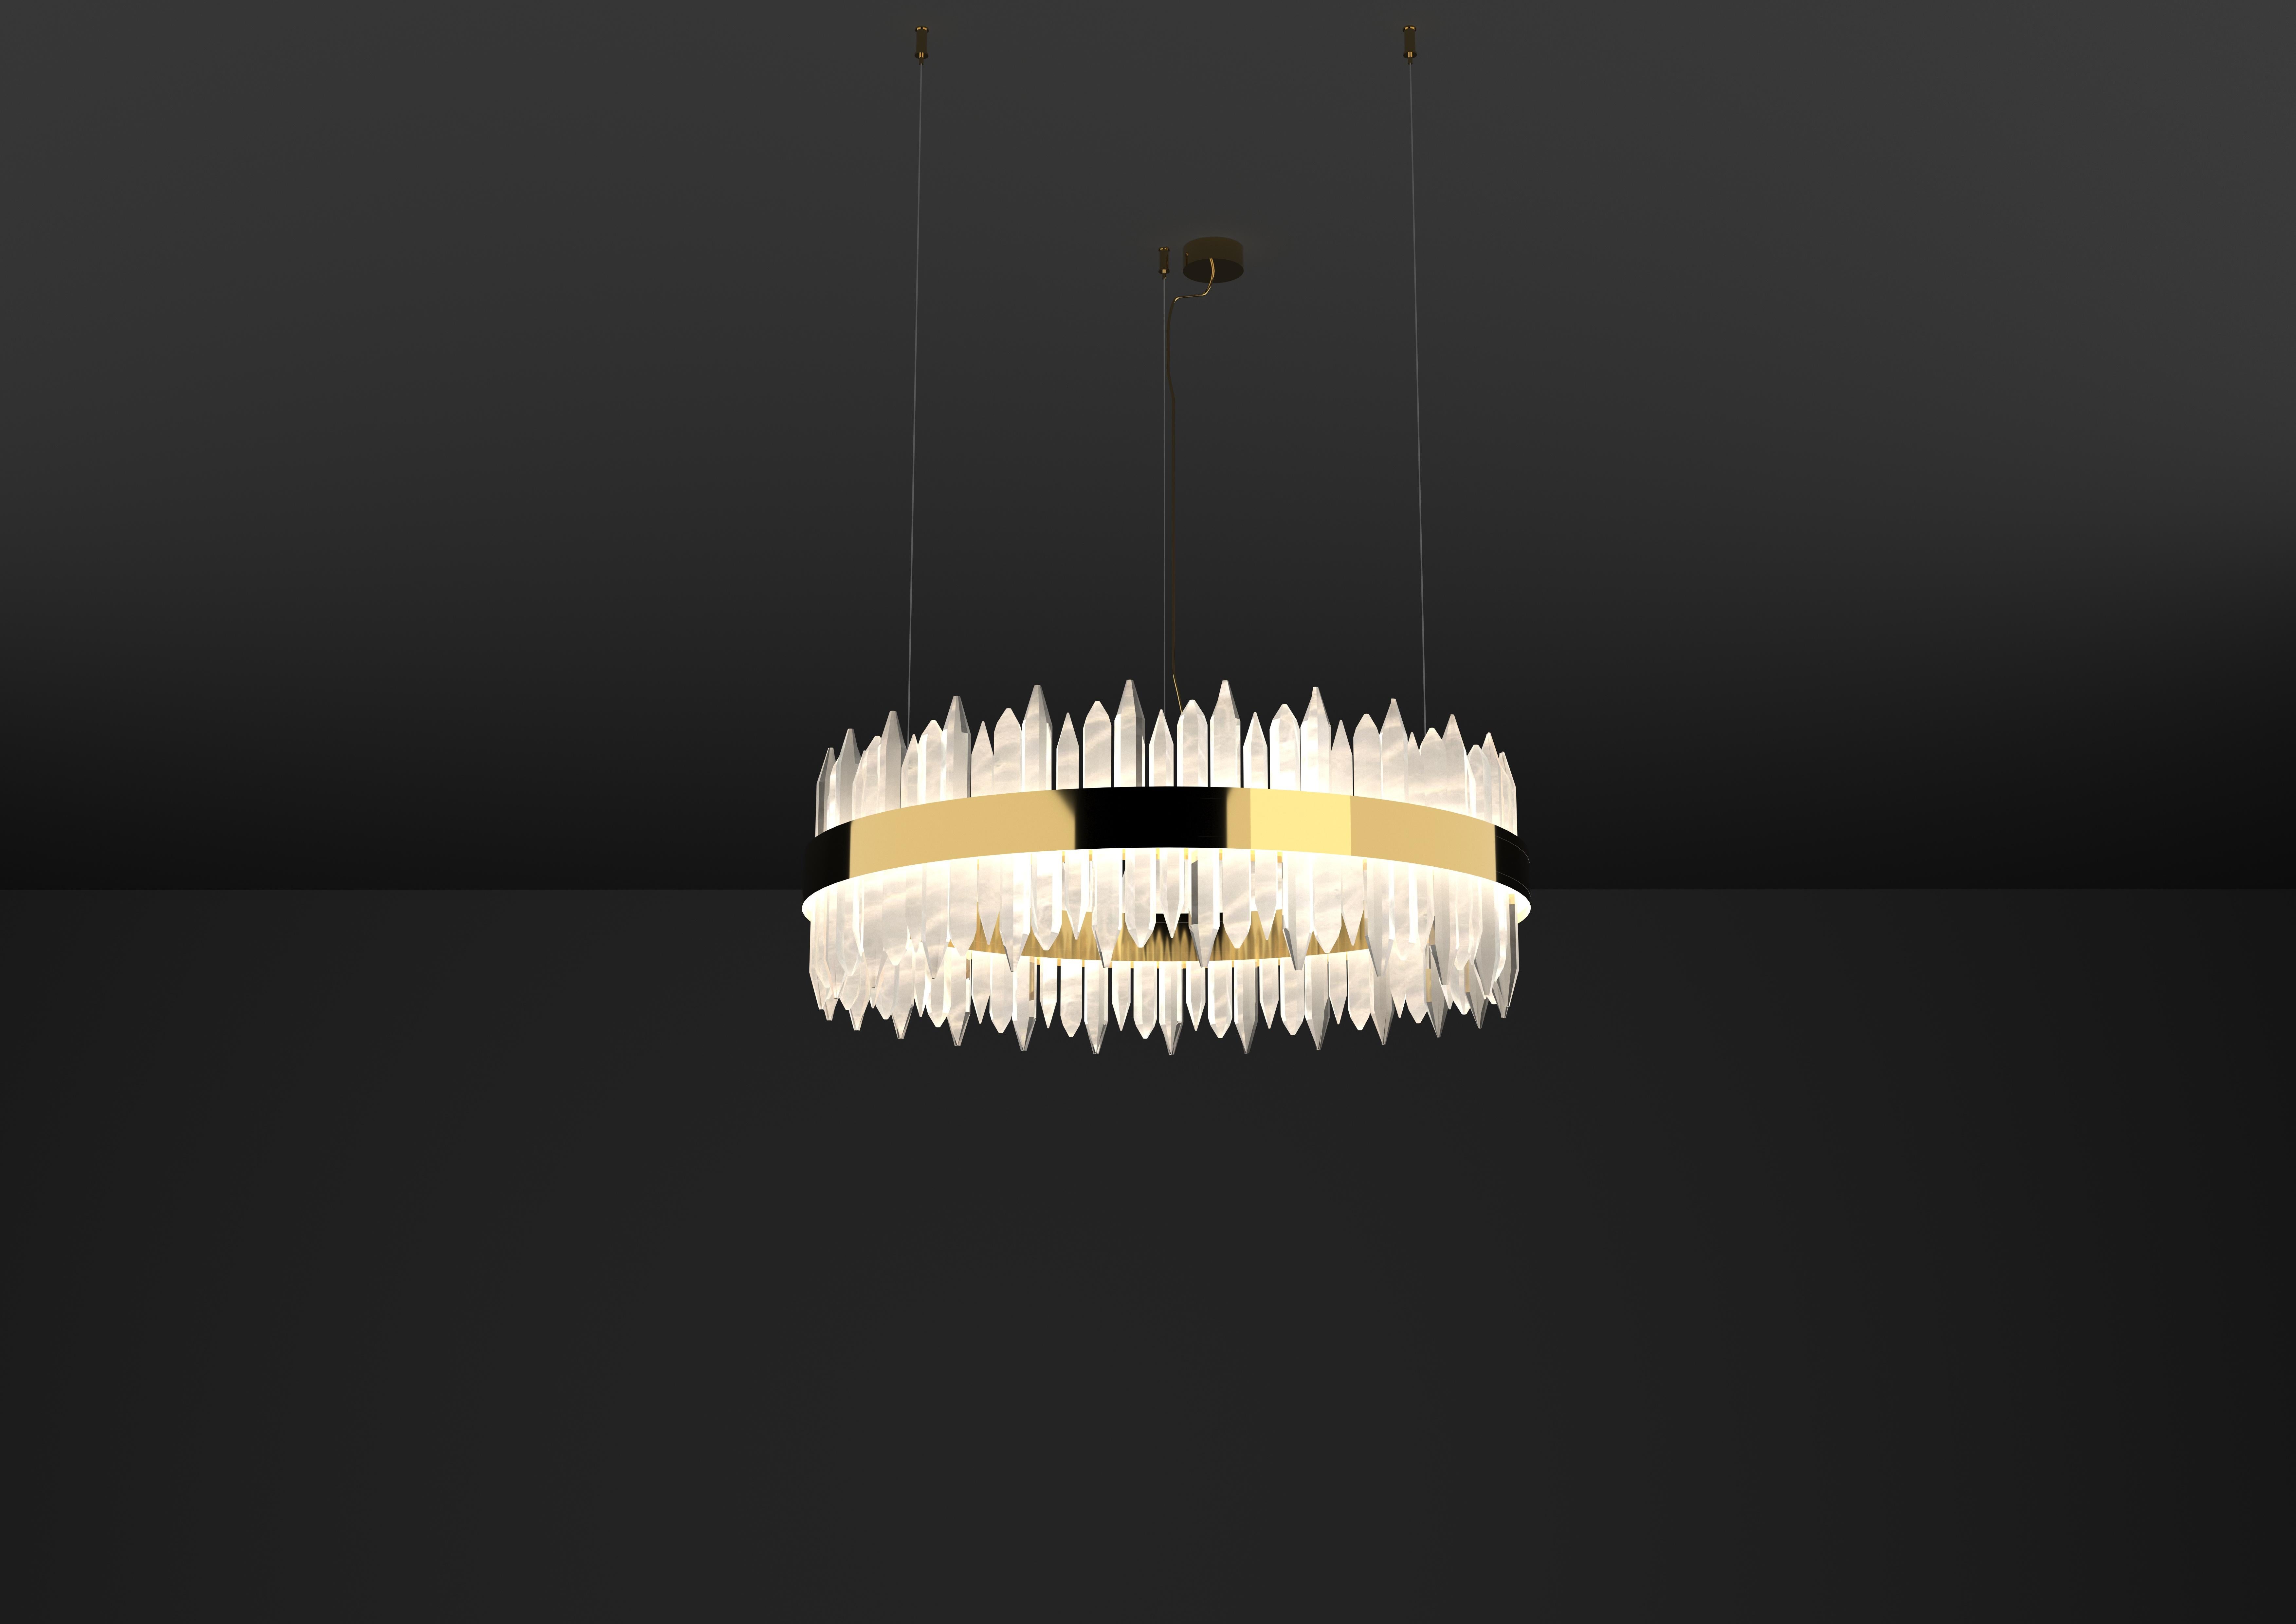 Urano Shiny Gold 120 Pendant Light 2 by Alabastro Italiano
Dimensions: Ø 120 x H 34 cm.
Materials: Glass and shiny gold metal.

2 x Strip LED, 162 Watt 16286 Lumen, 24 V, 3000 K.

Available in different sizes: Ø 60, Ø 80, Ø 100 and Ø 120 cm.